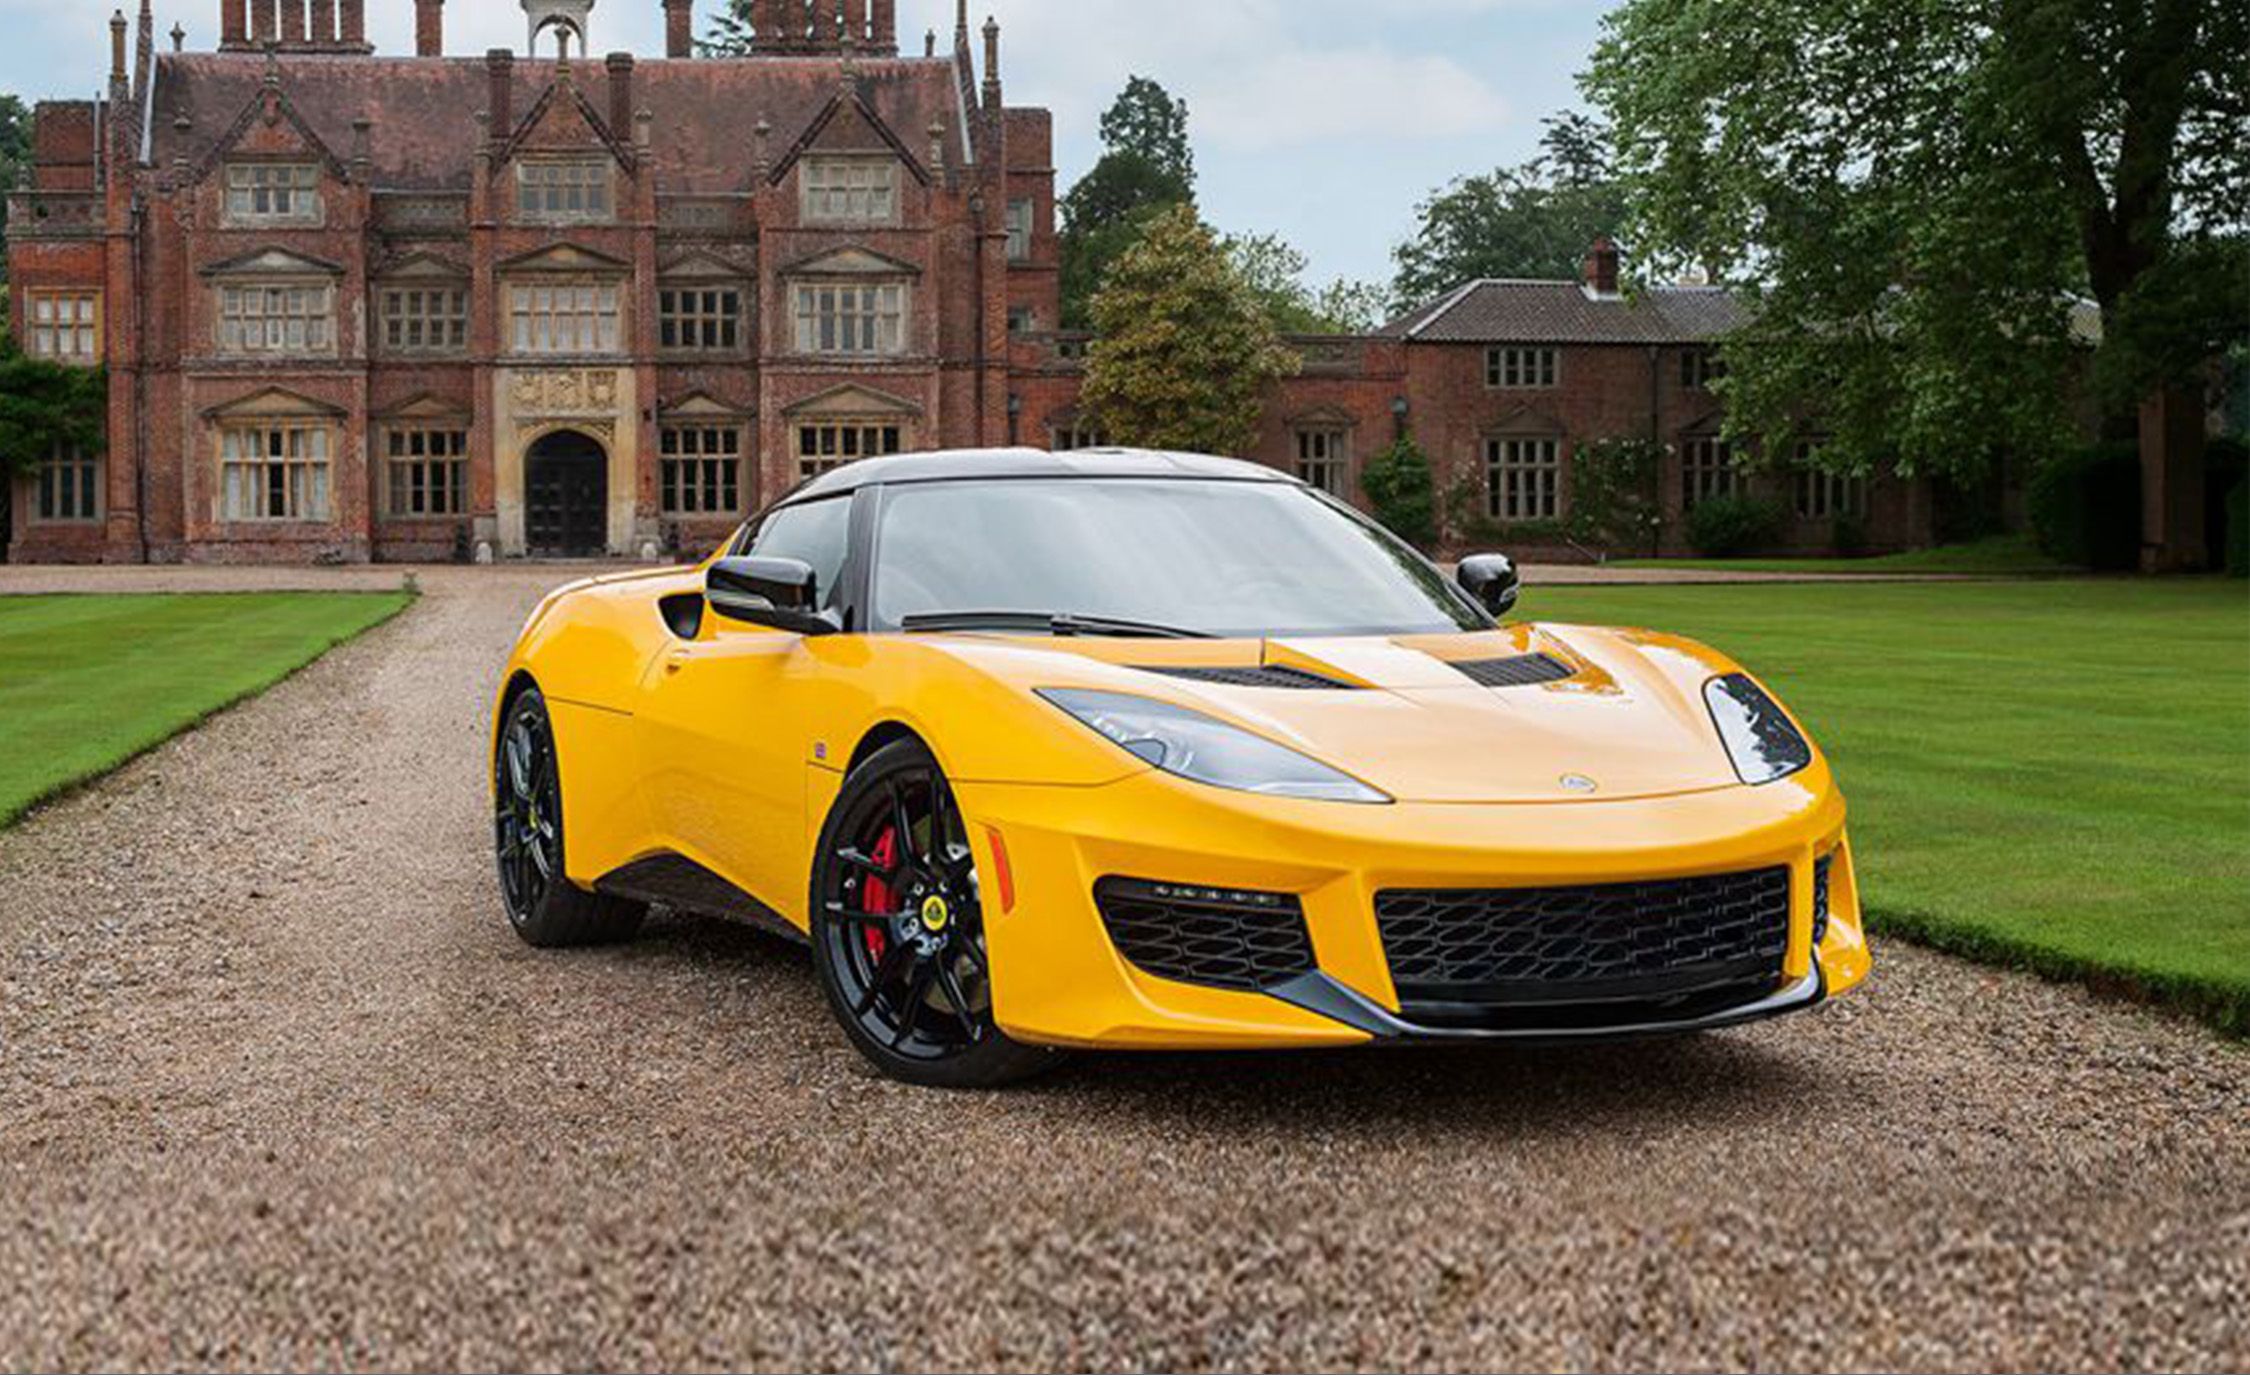 Lotus Cars Boss Confirms There's Still Life in the Famous Brand